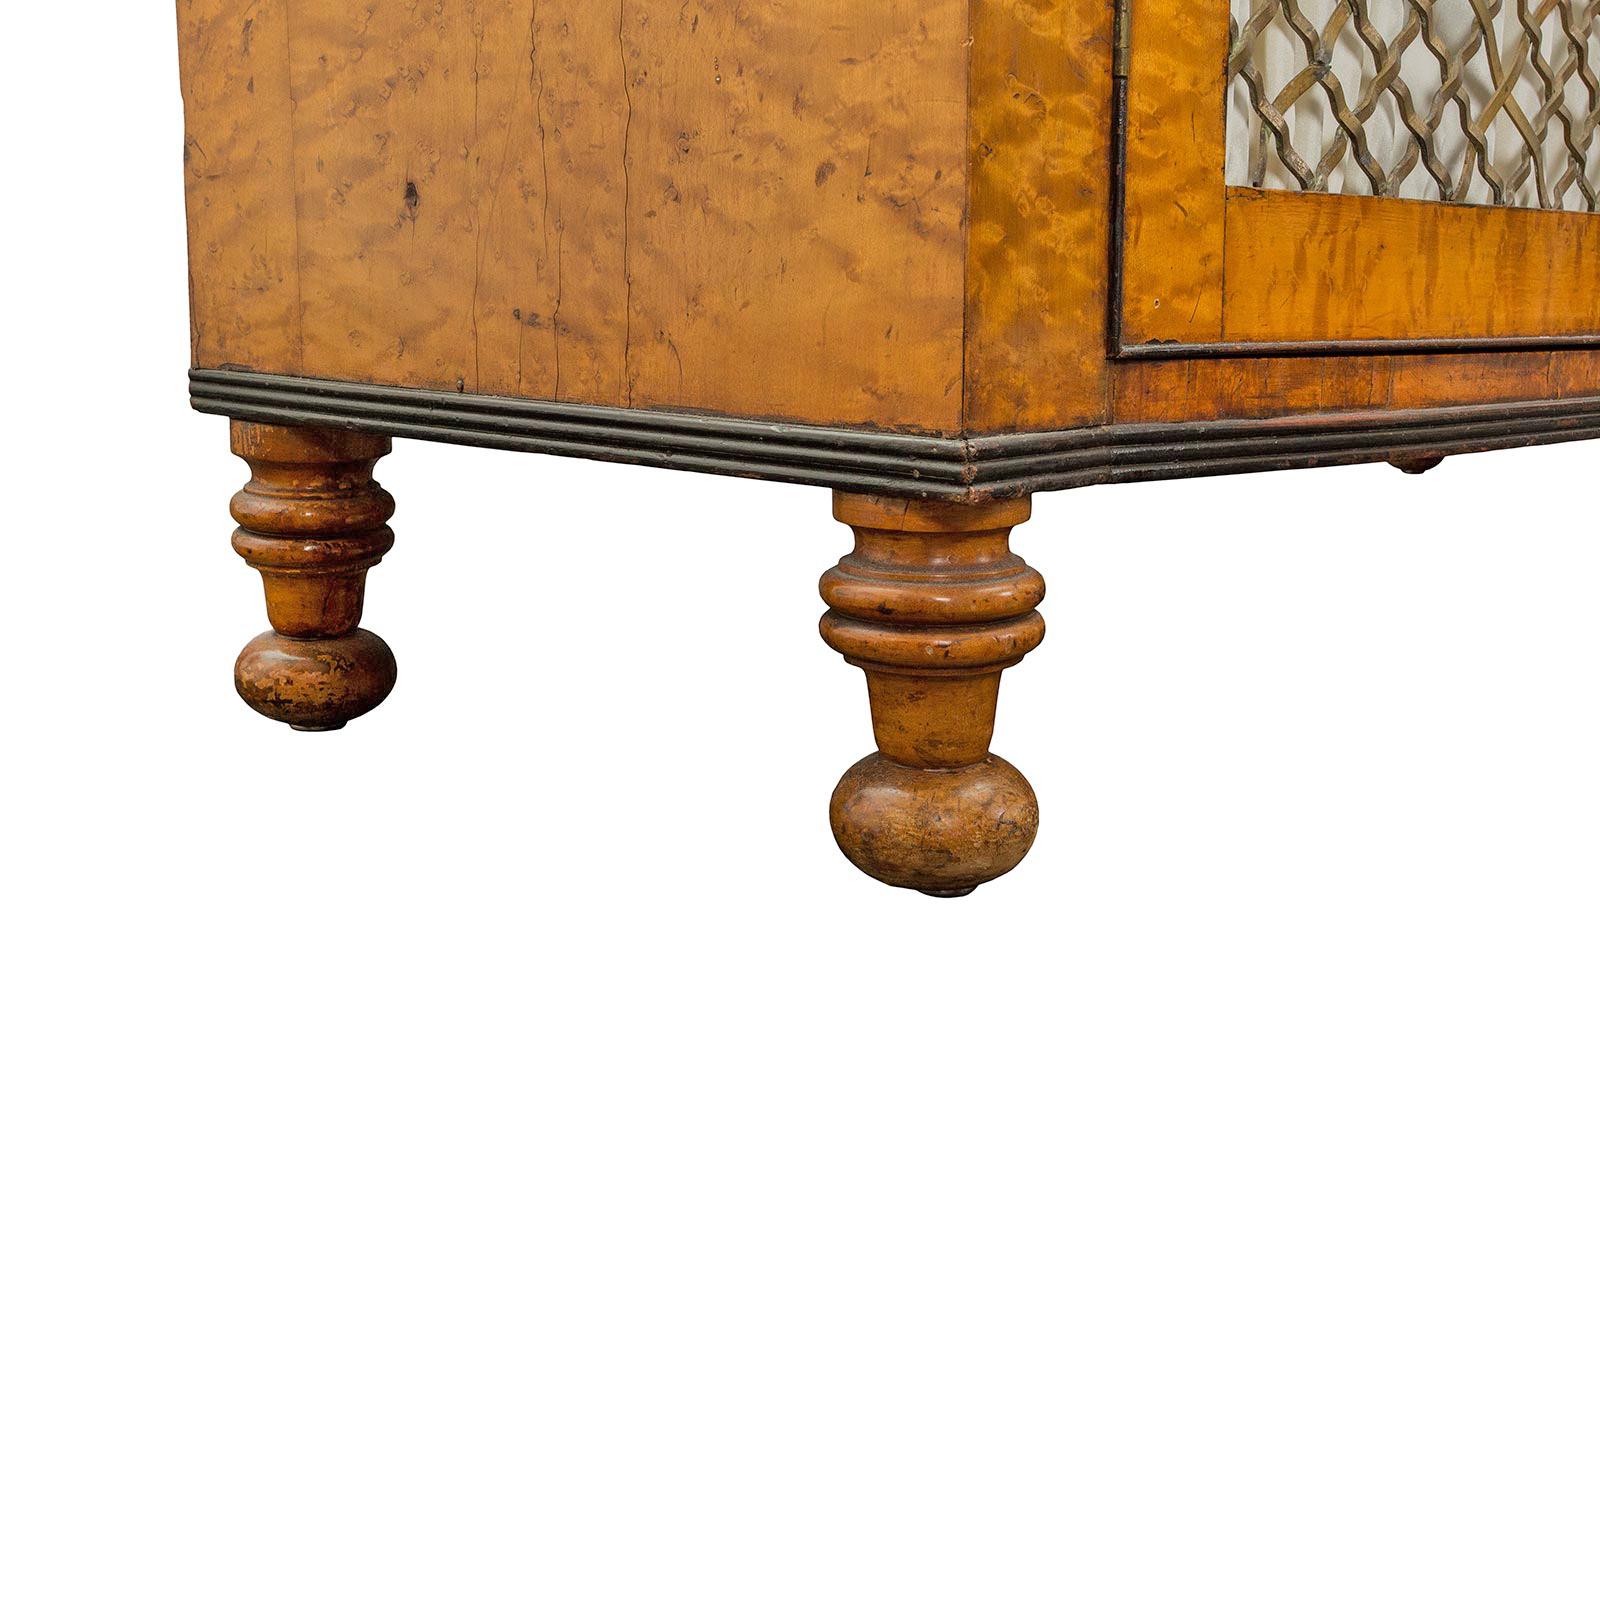 English 19th Century Regency St. Bow Front Birds Eye Maple Cabinet, Circa 1810 For Sale 3